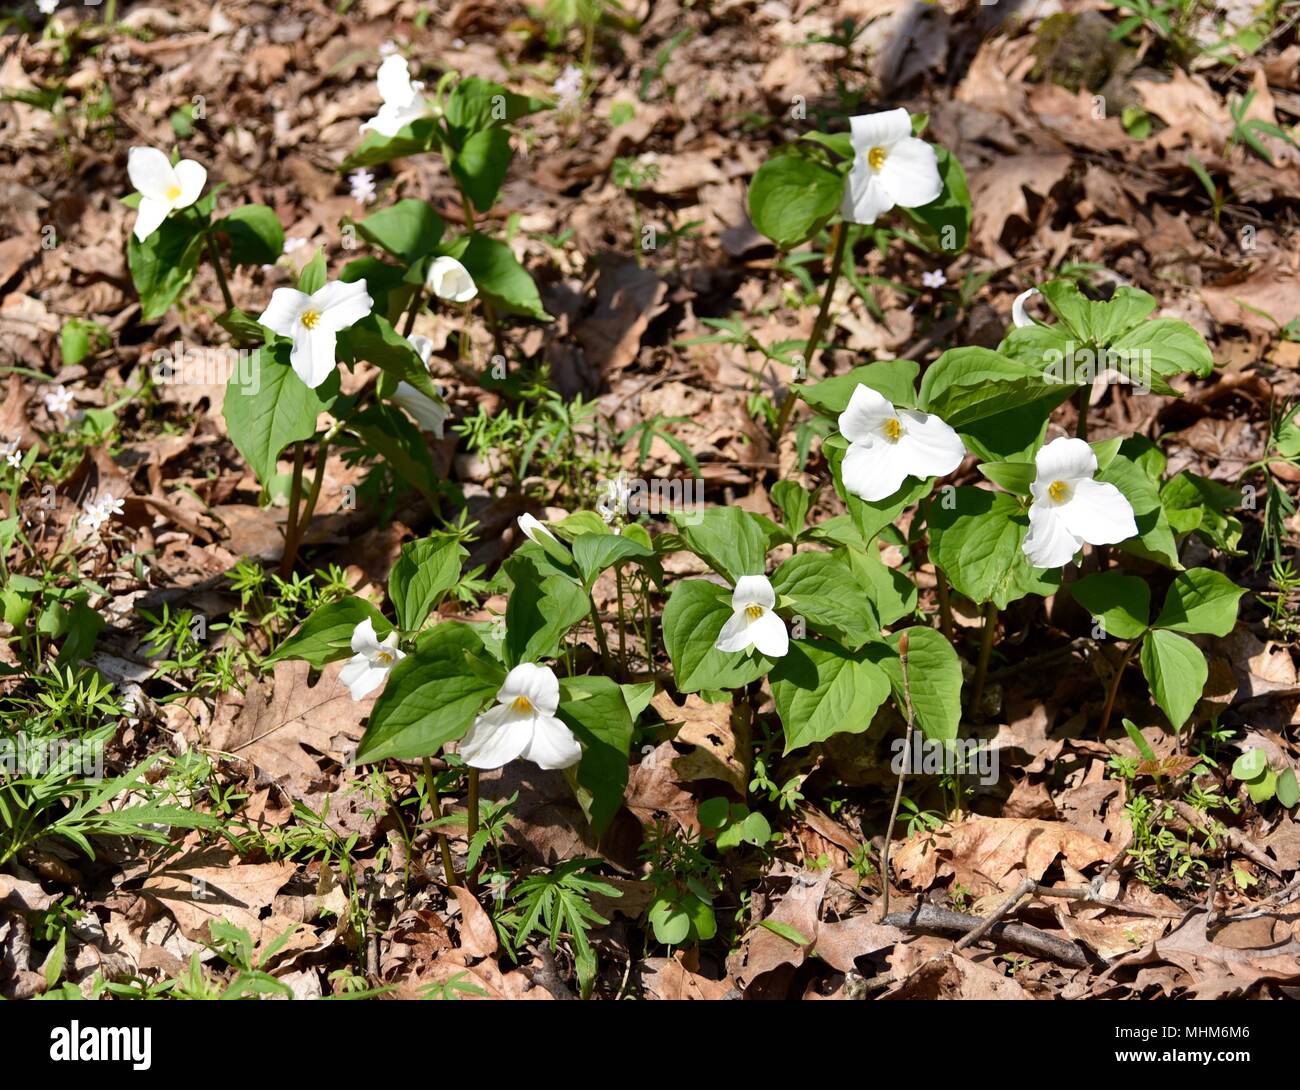 A colony of large white trillium plants emerging in a spring forest. Stock Photo